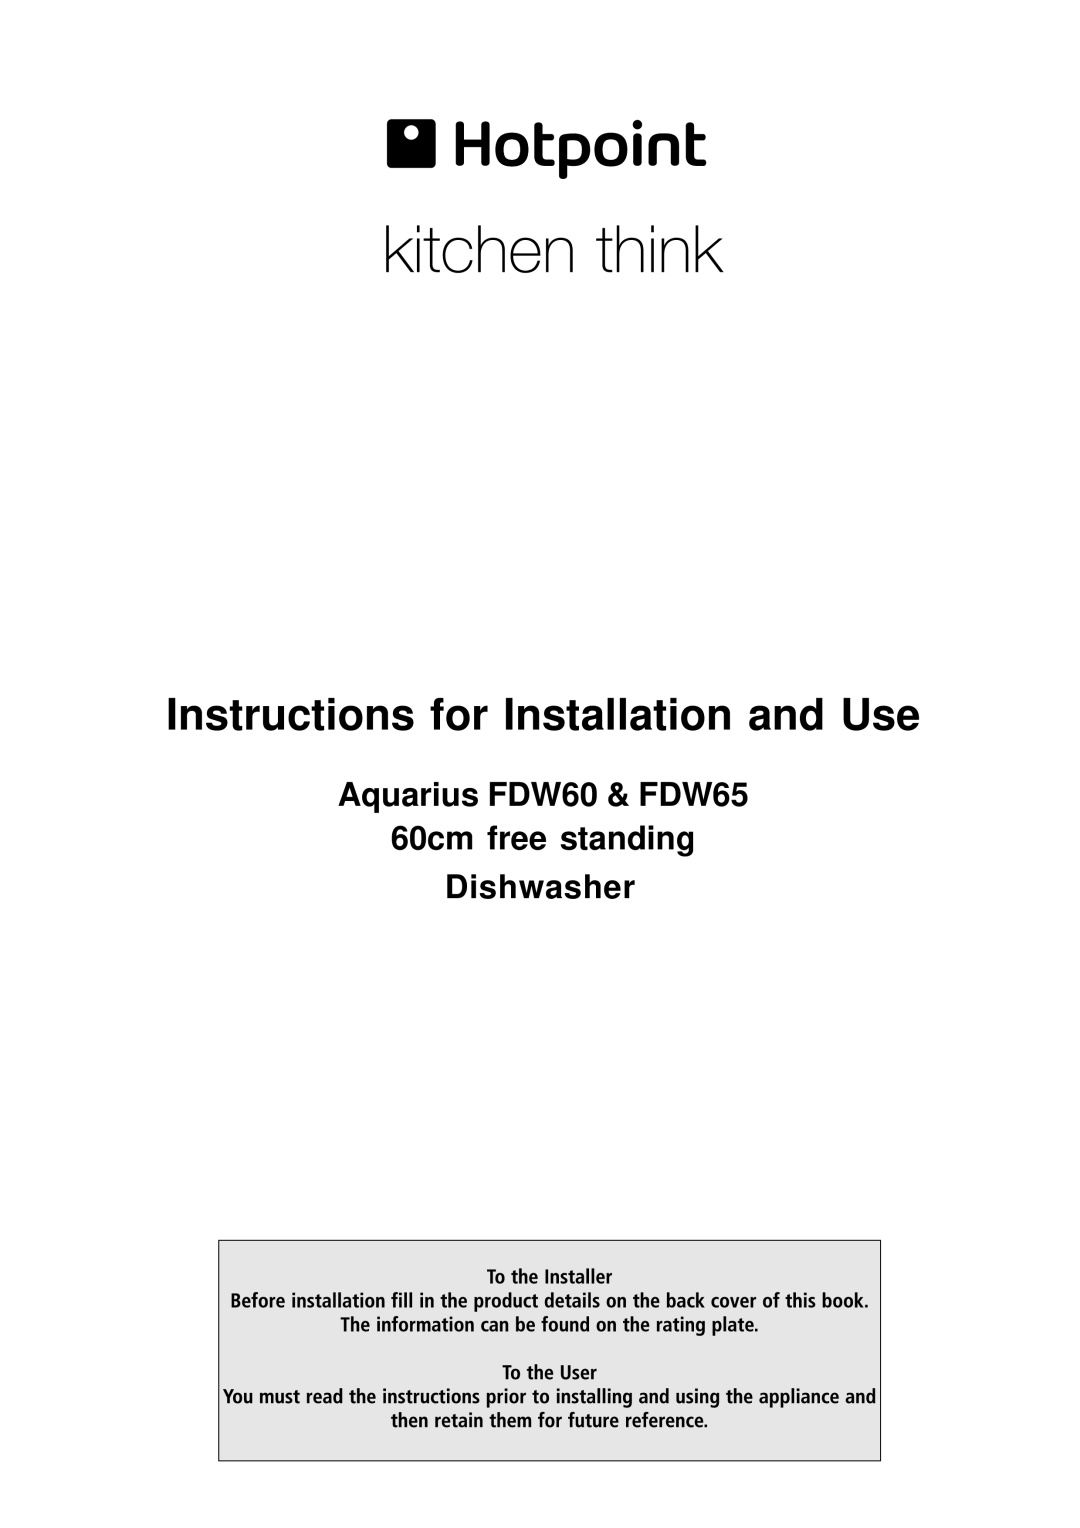 Hotpoint manual Instructions for Installation and Use, Aquarius FDW60 & FDW65 60cm free standing Dishwasher 